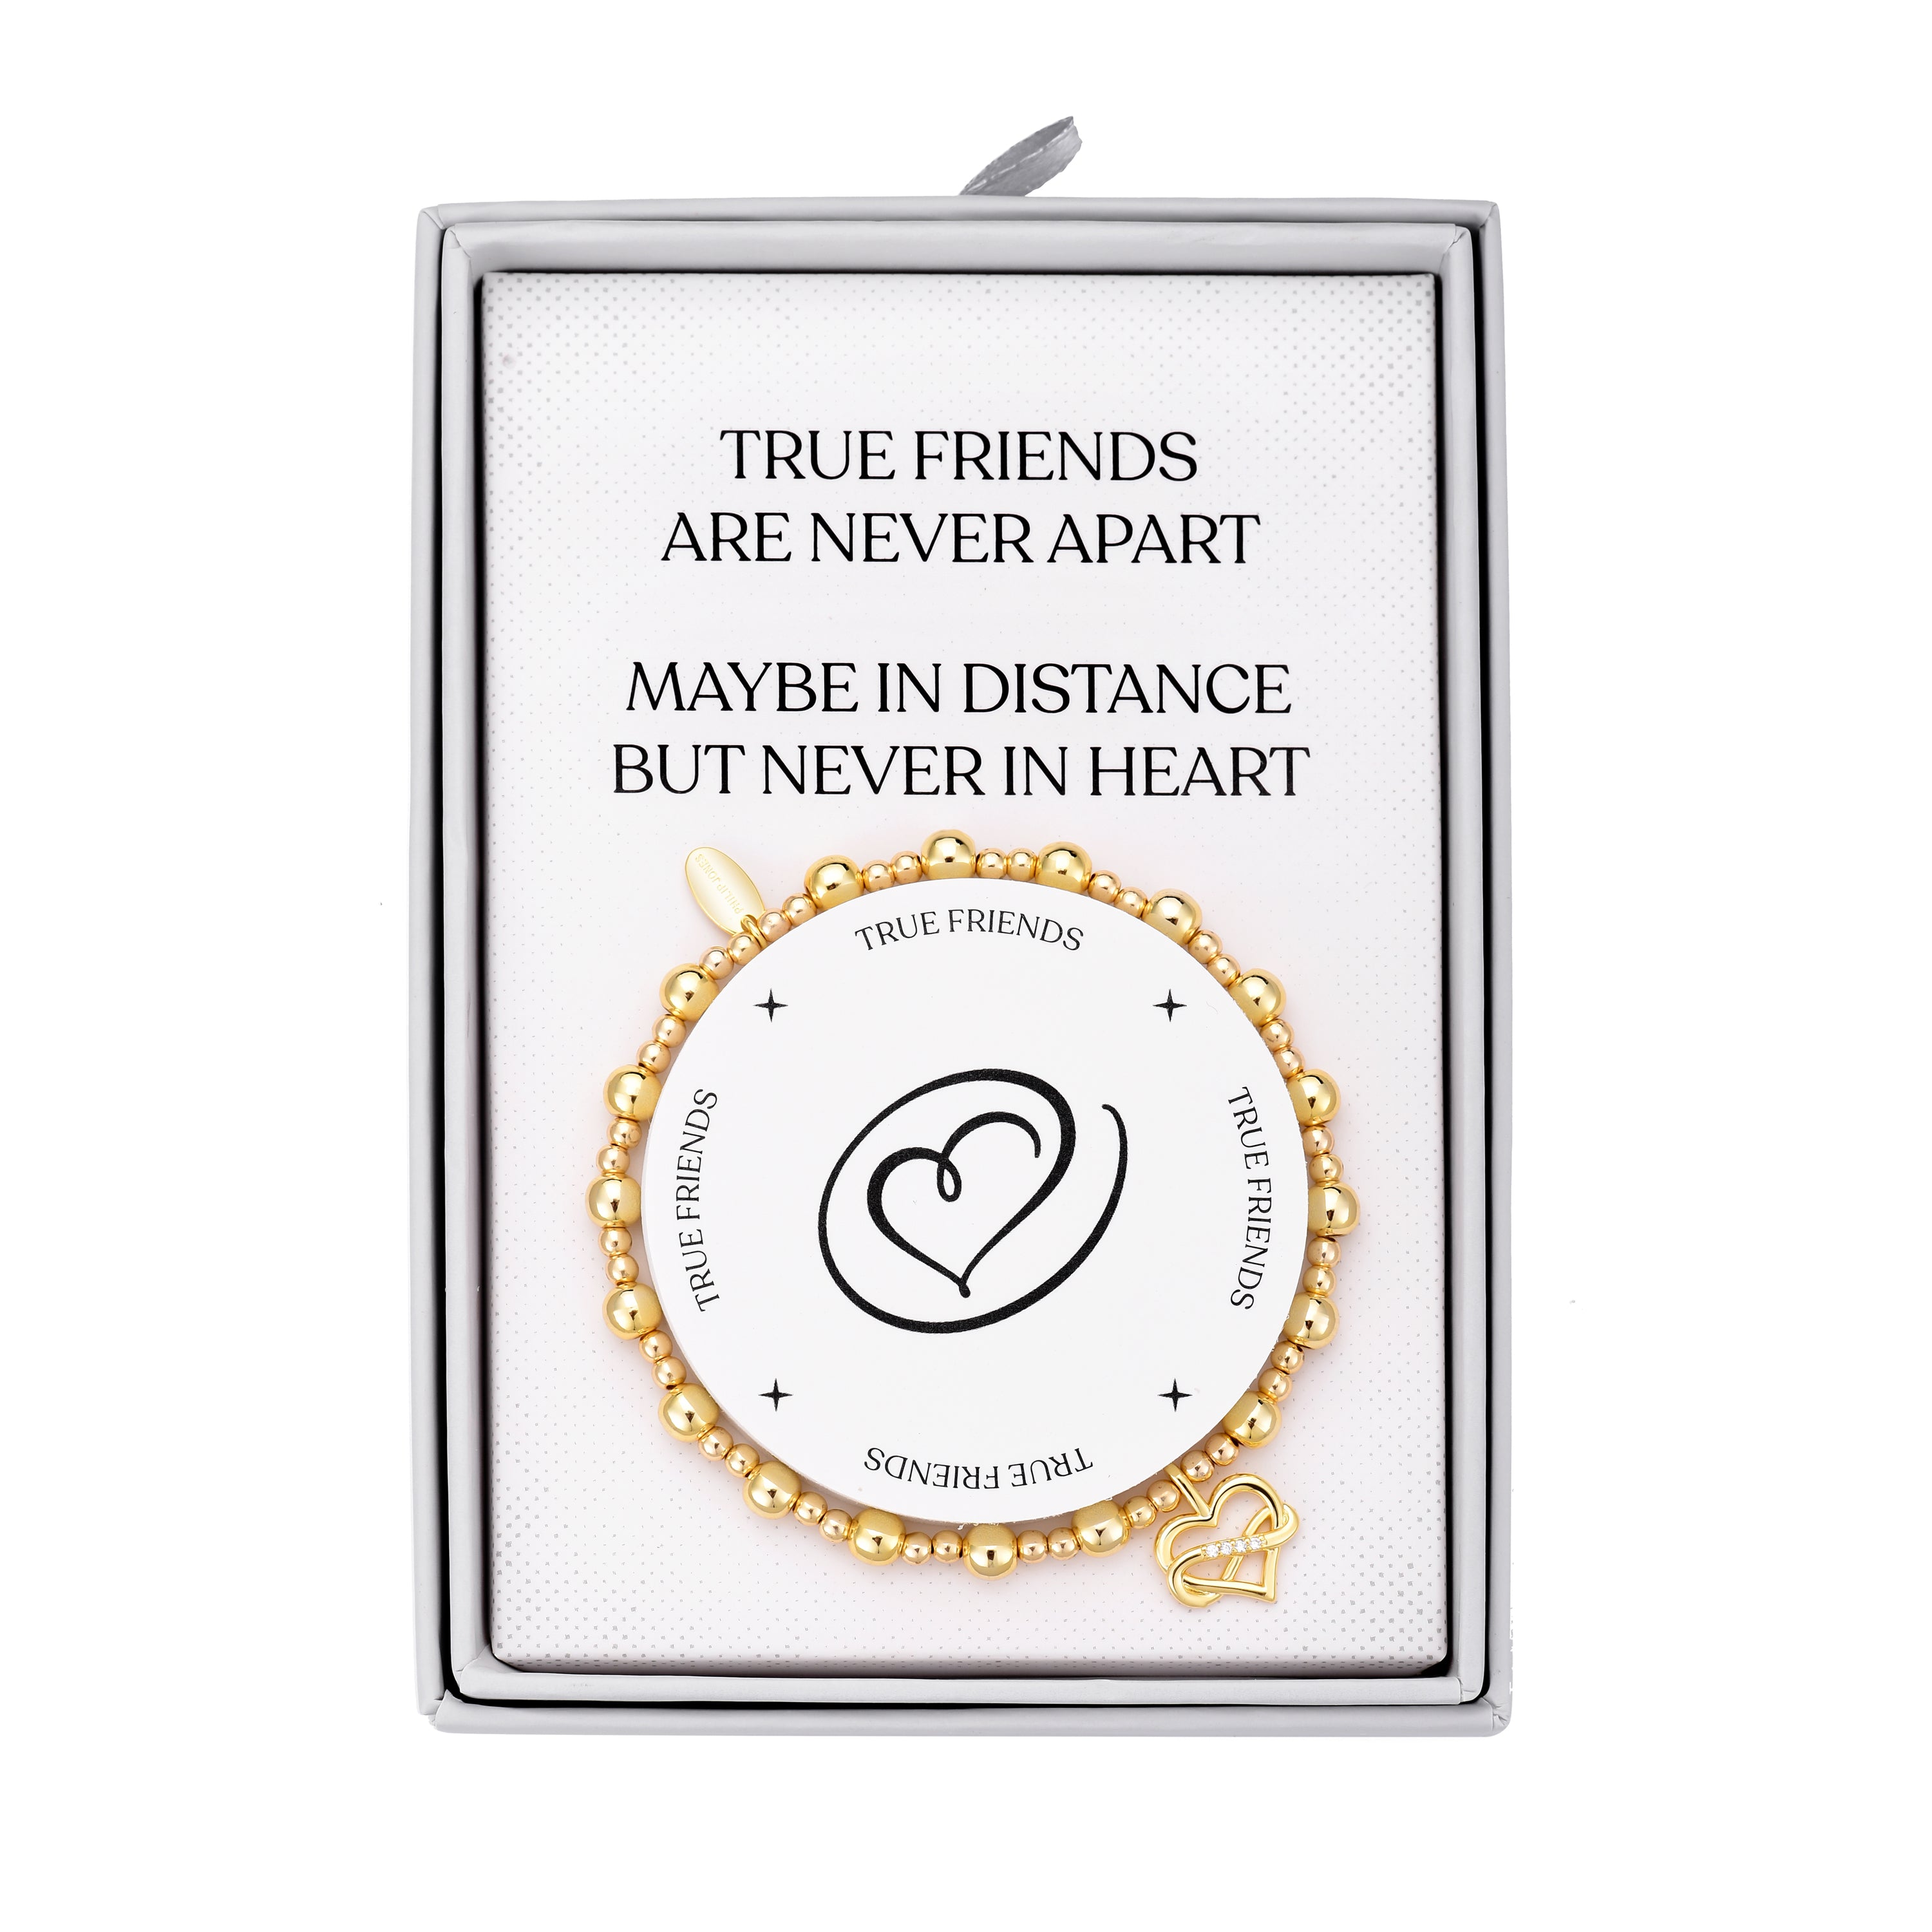 Gold Plated True Friends Quote Stretch Bracelet with Gift Box by Philip Jones Jewellery